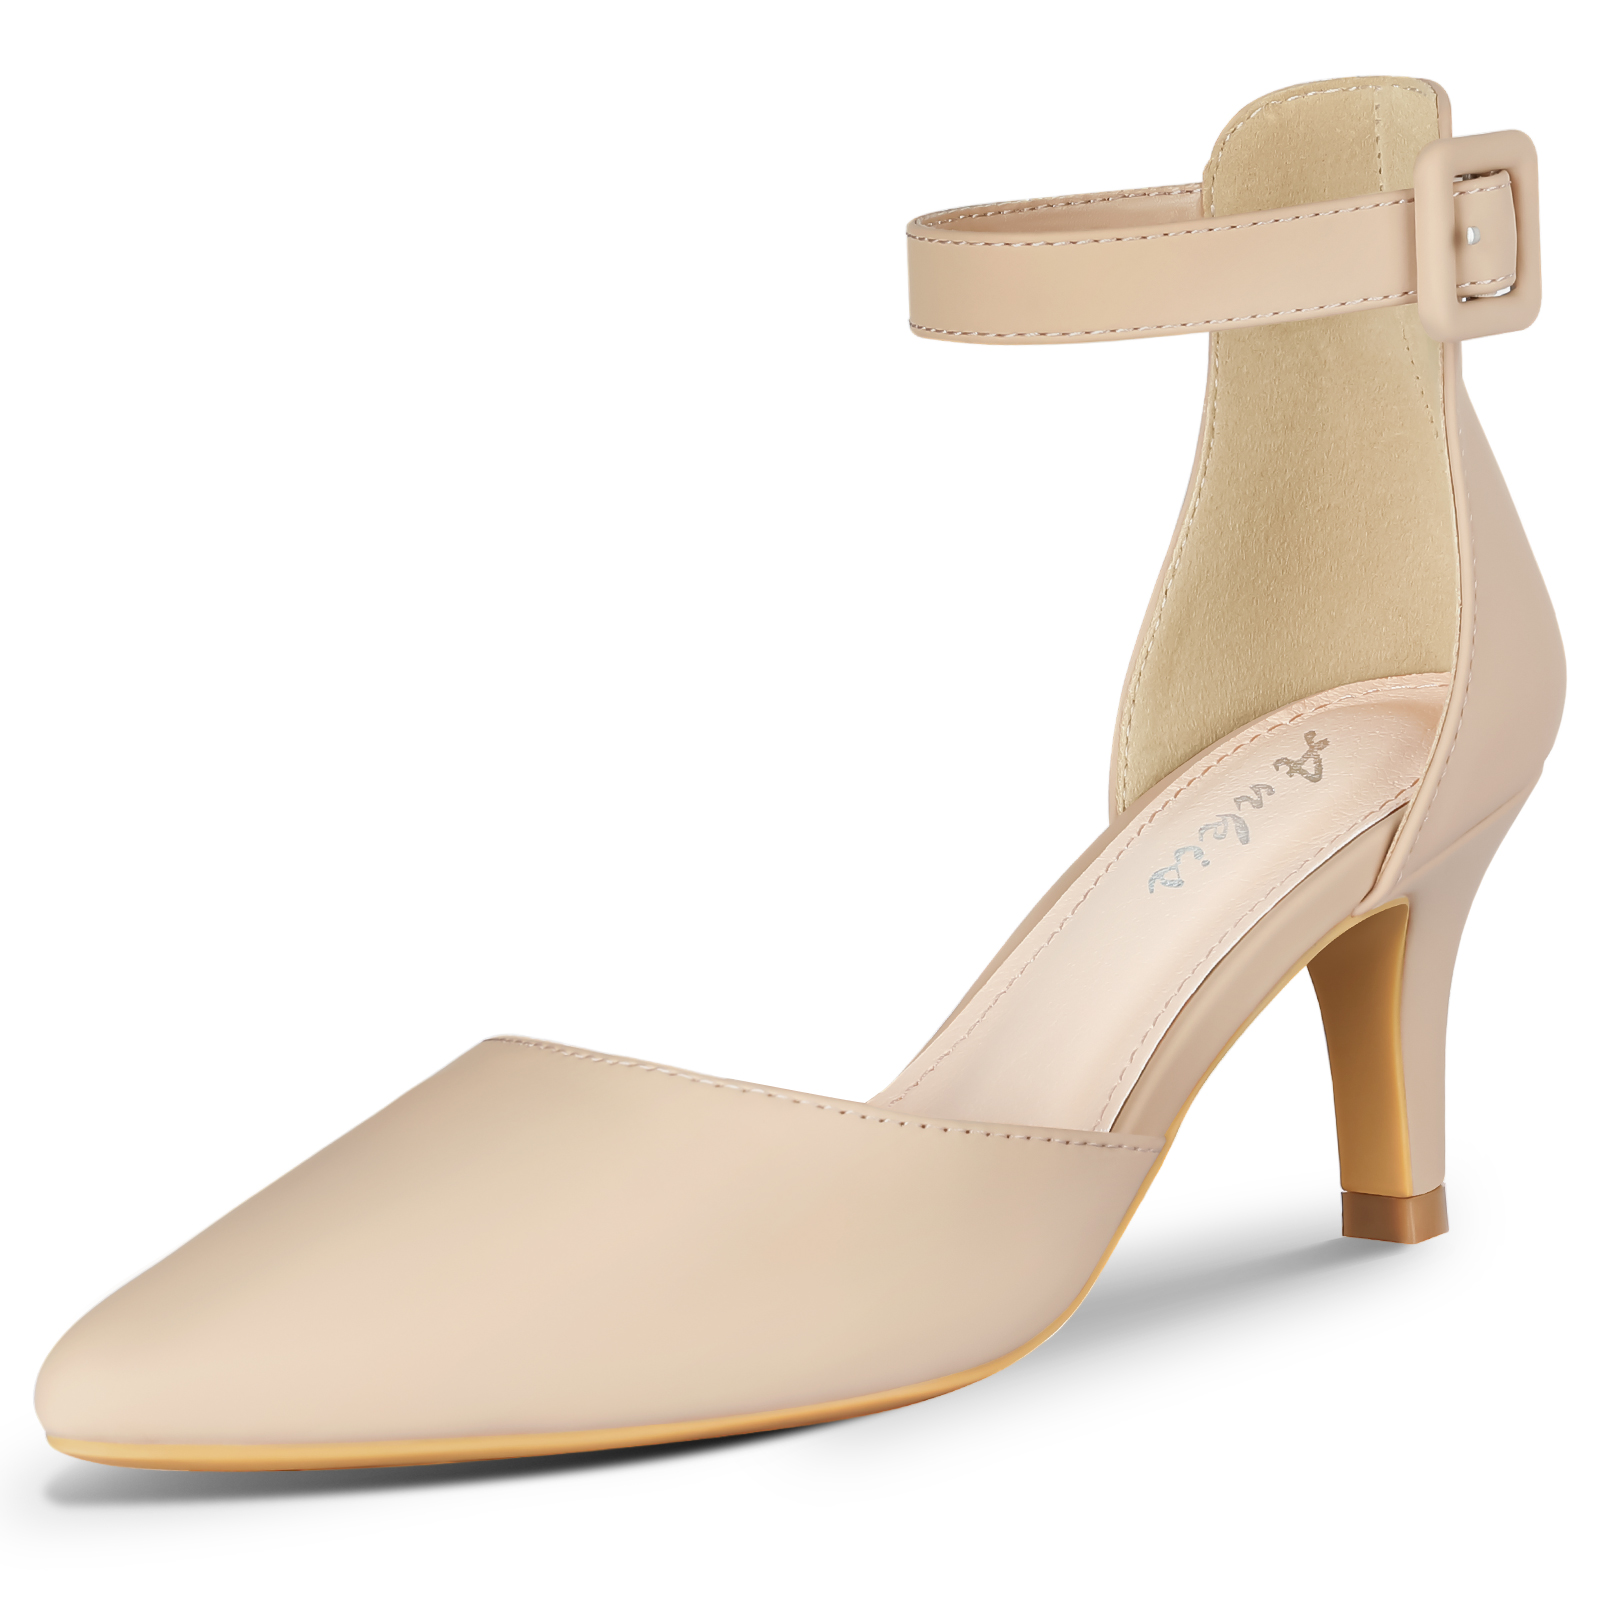 Ankis Women's Pumps Low Heel 2.6 Inches-Nude